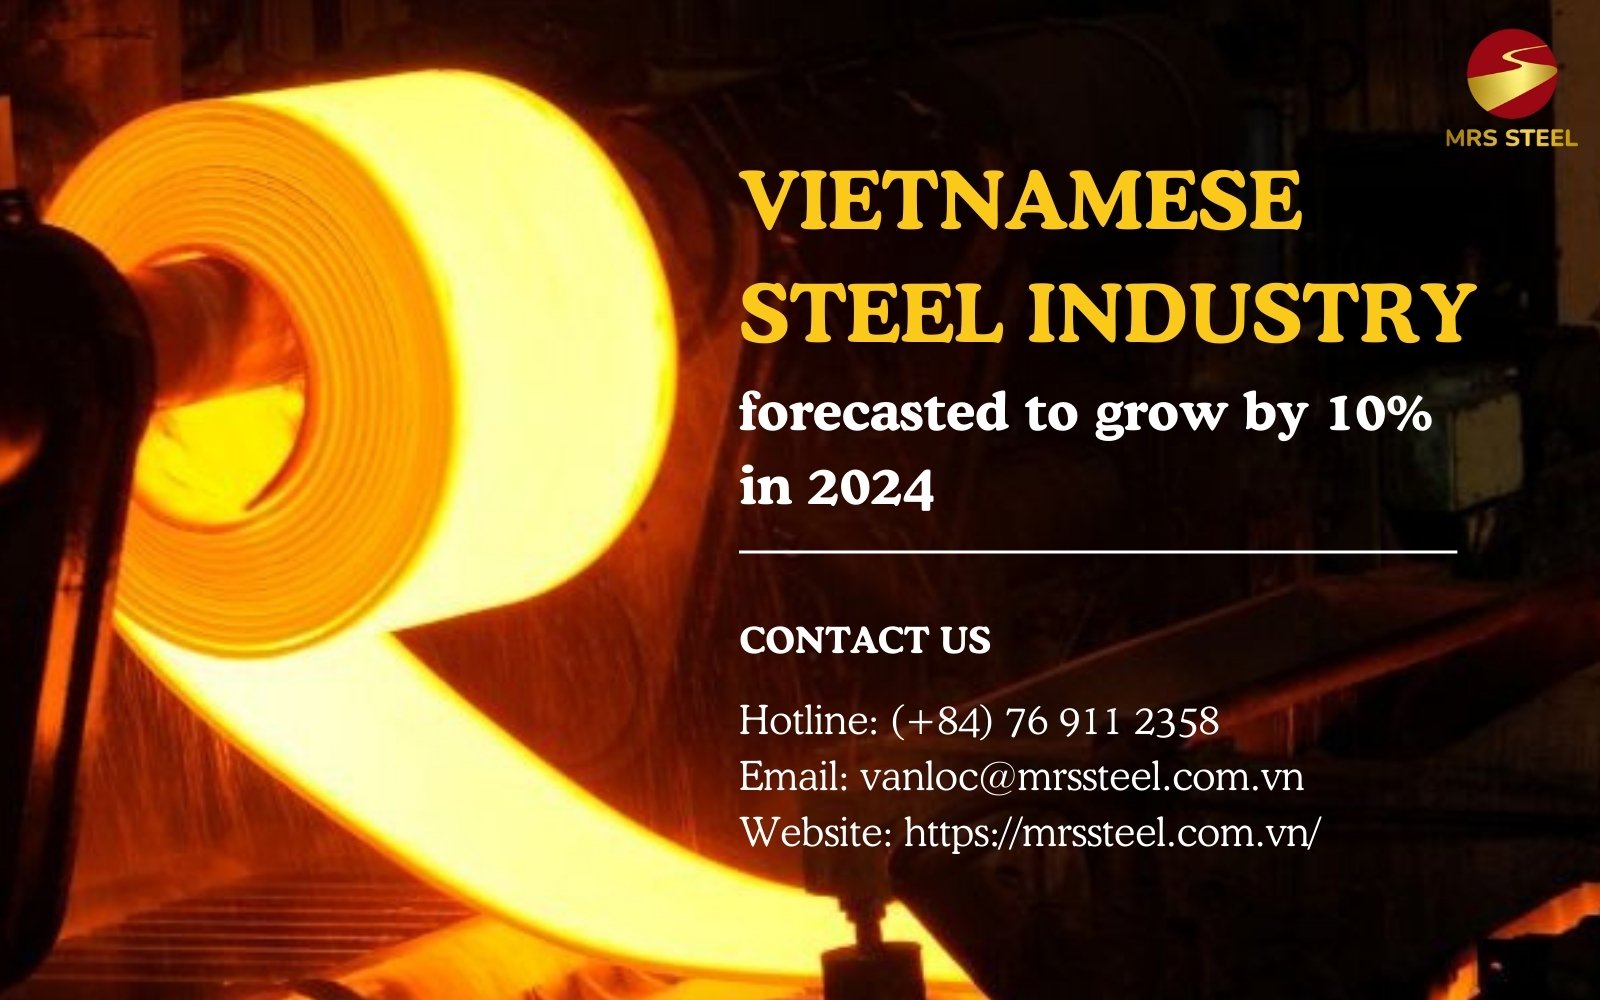 The Vietnamese steel industry is forecasted to grow by 10% in 2024